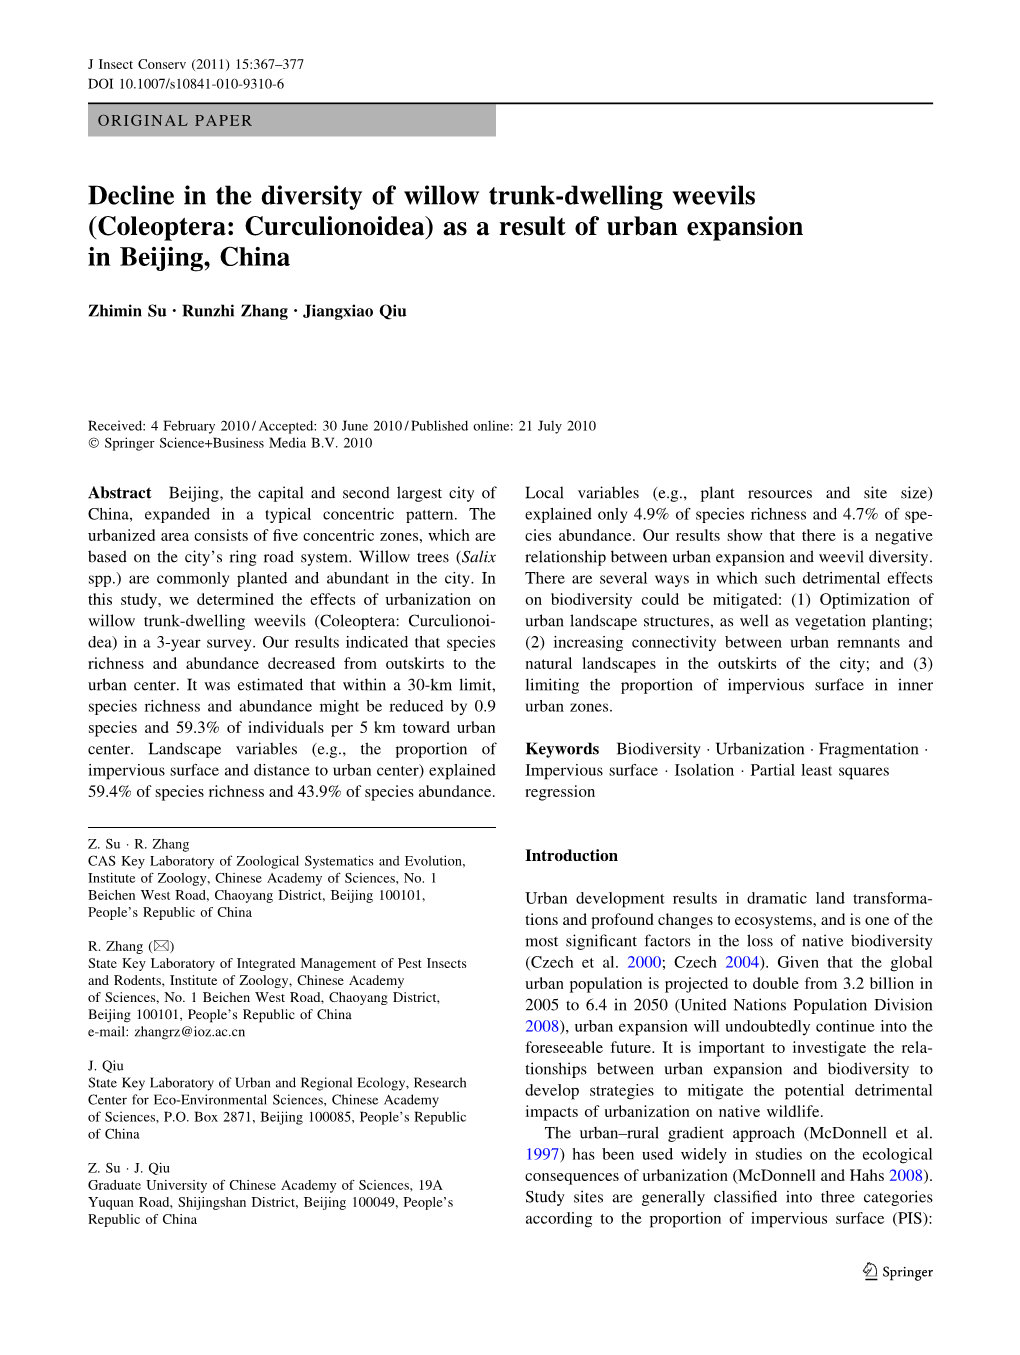 Decline in the Diversity of Willow Trunk-Dwelling Weevils (Coleoptera: Curculionoidea) As a Result of Urban Expansion in Beijing, China